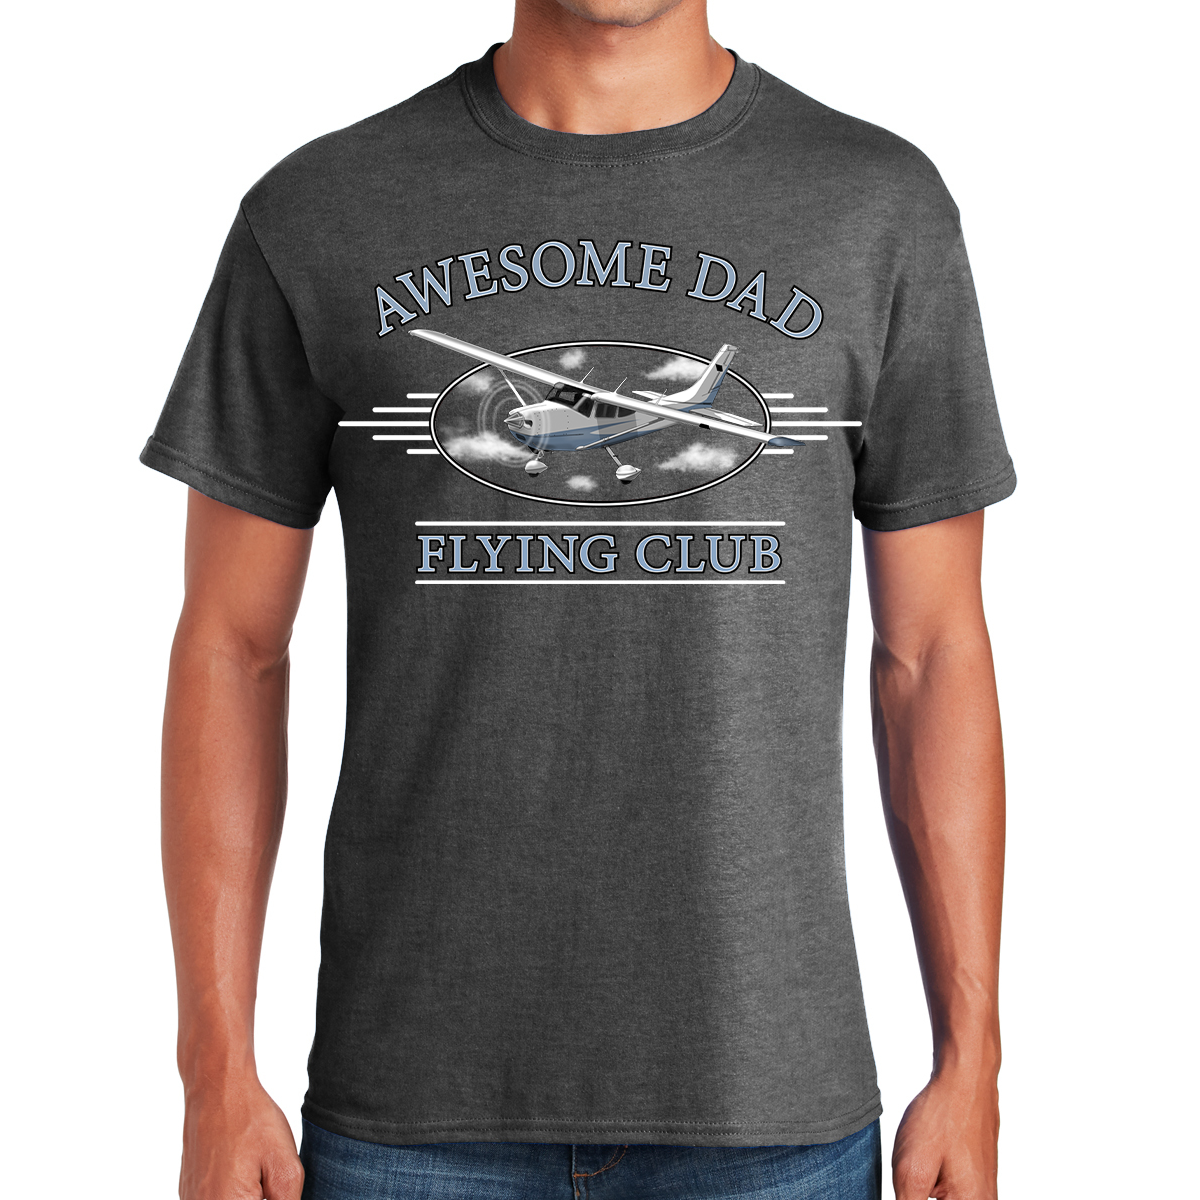 Awesome Dad Flying Club Soaring To New Heights In Fatherhood Gift For Dads T-shirt